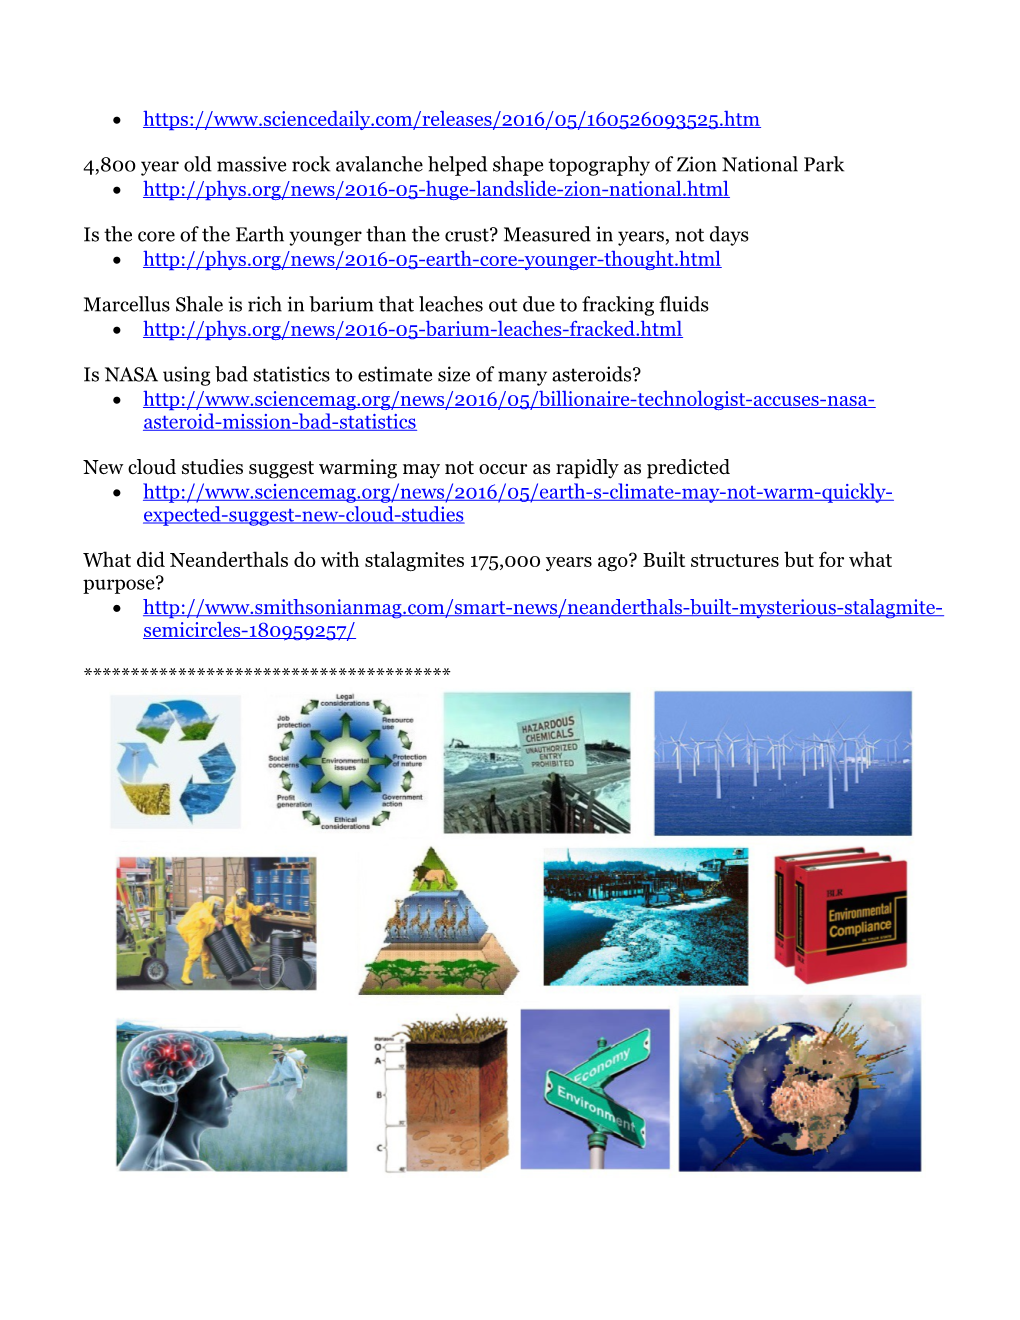 Geosciences Bulletin Board 30 May 2016- Compiled by Elaine J. Hanford